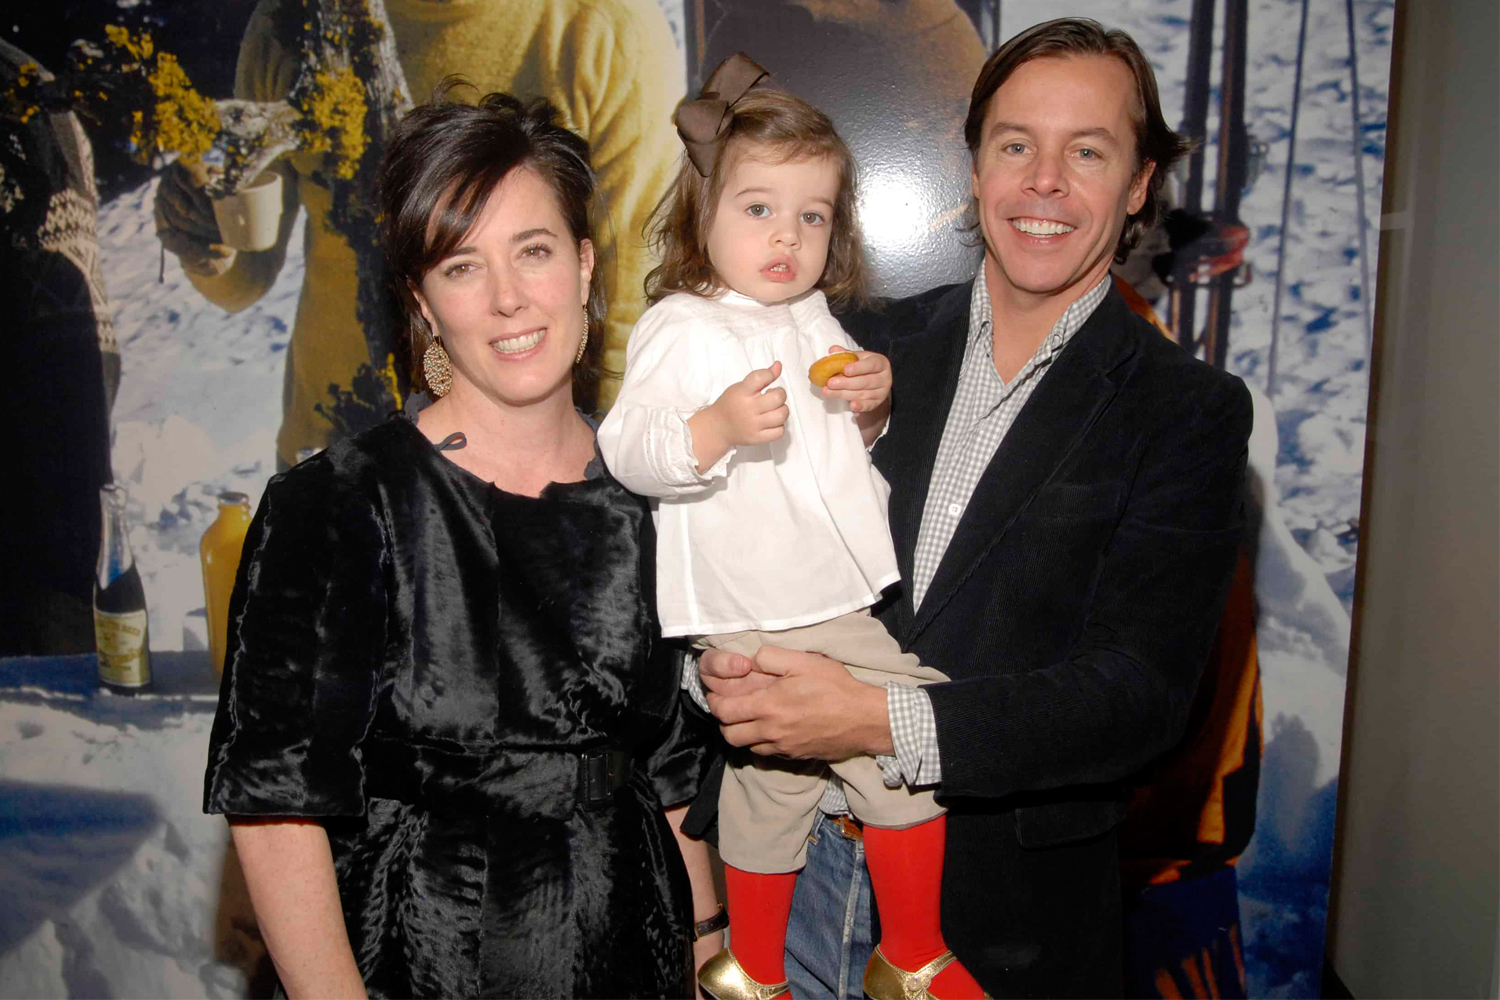 Kate Spade’s Daughter: Frances Beatrix Spade - Net Worth, Family And More